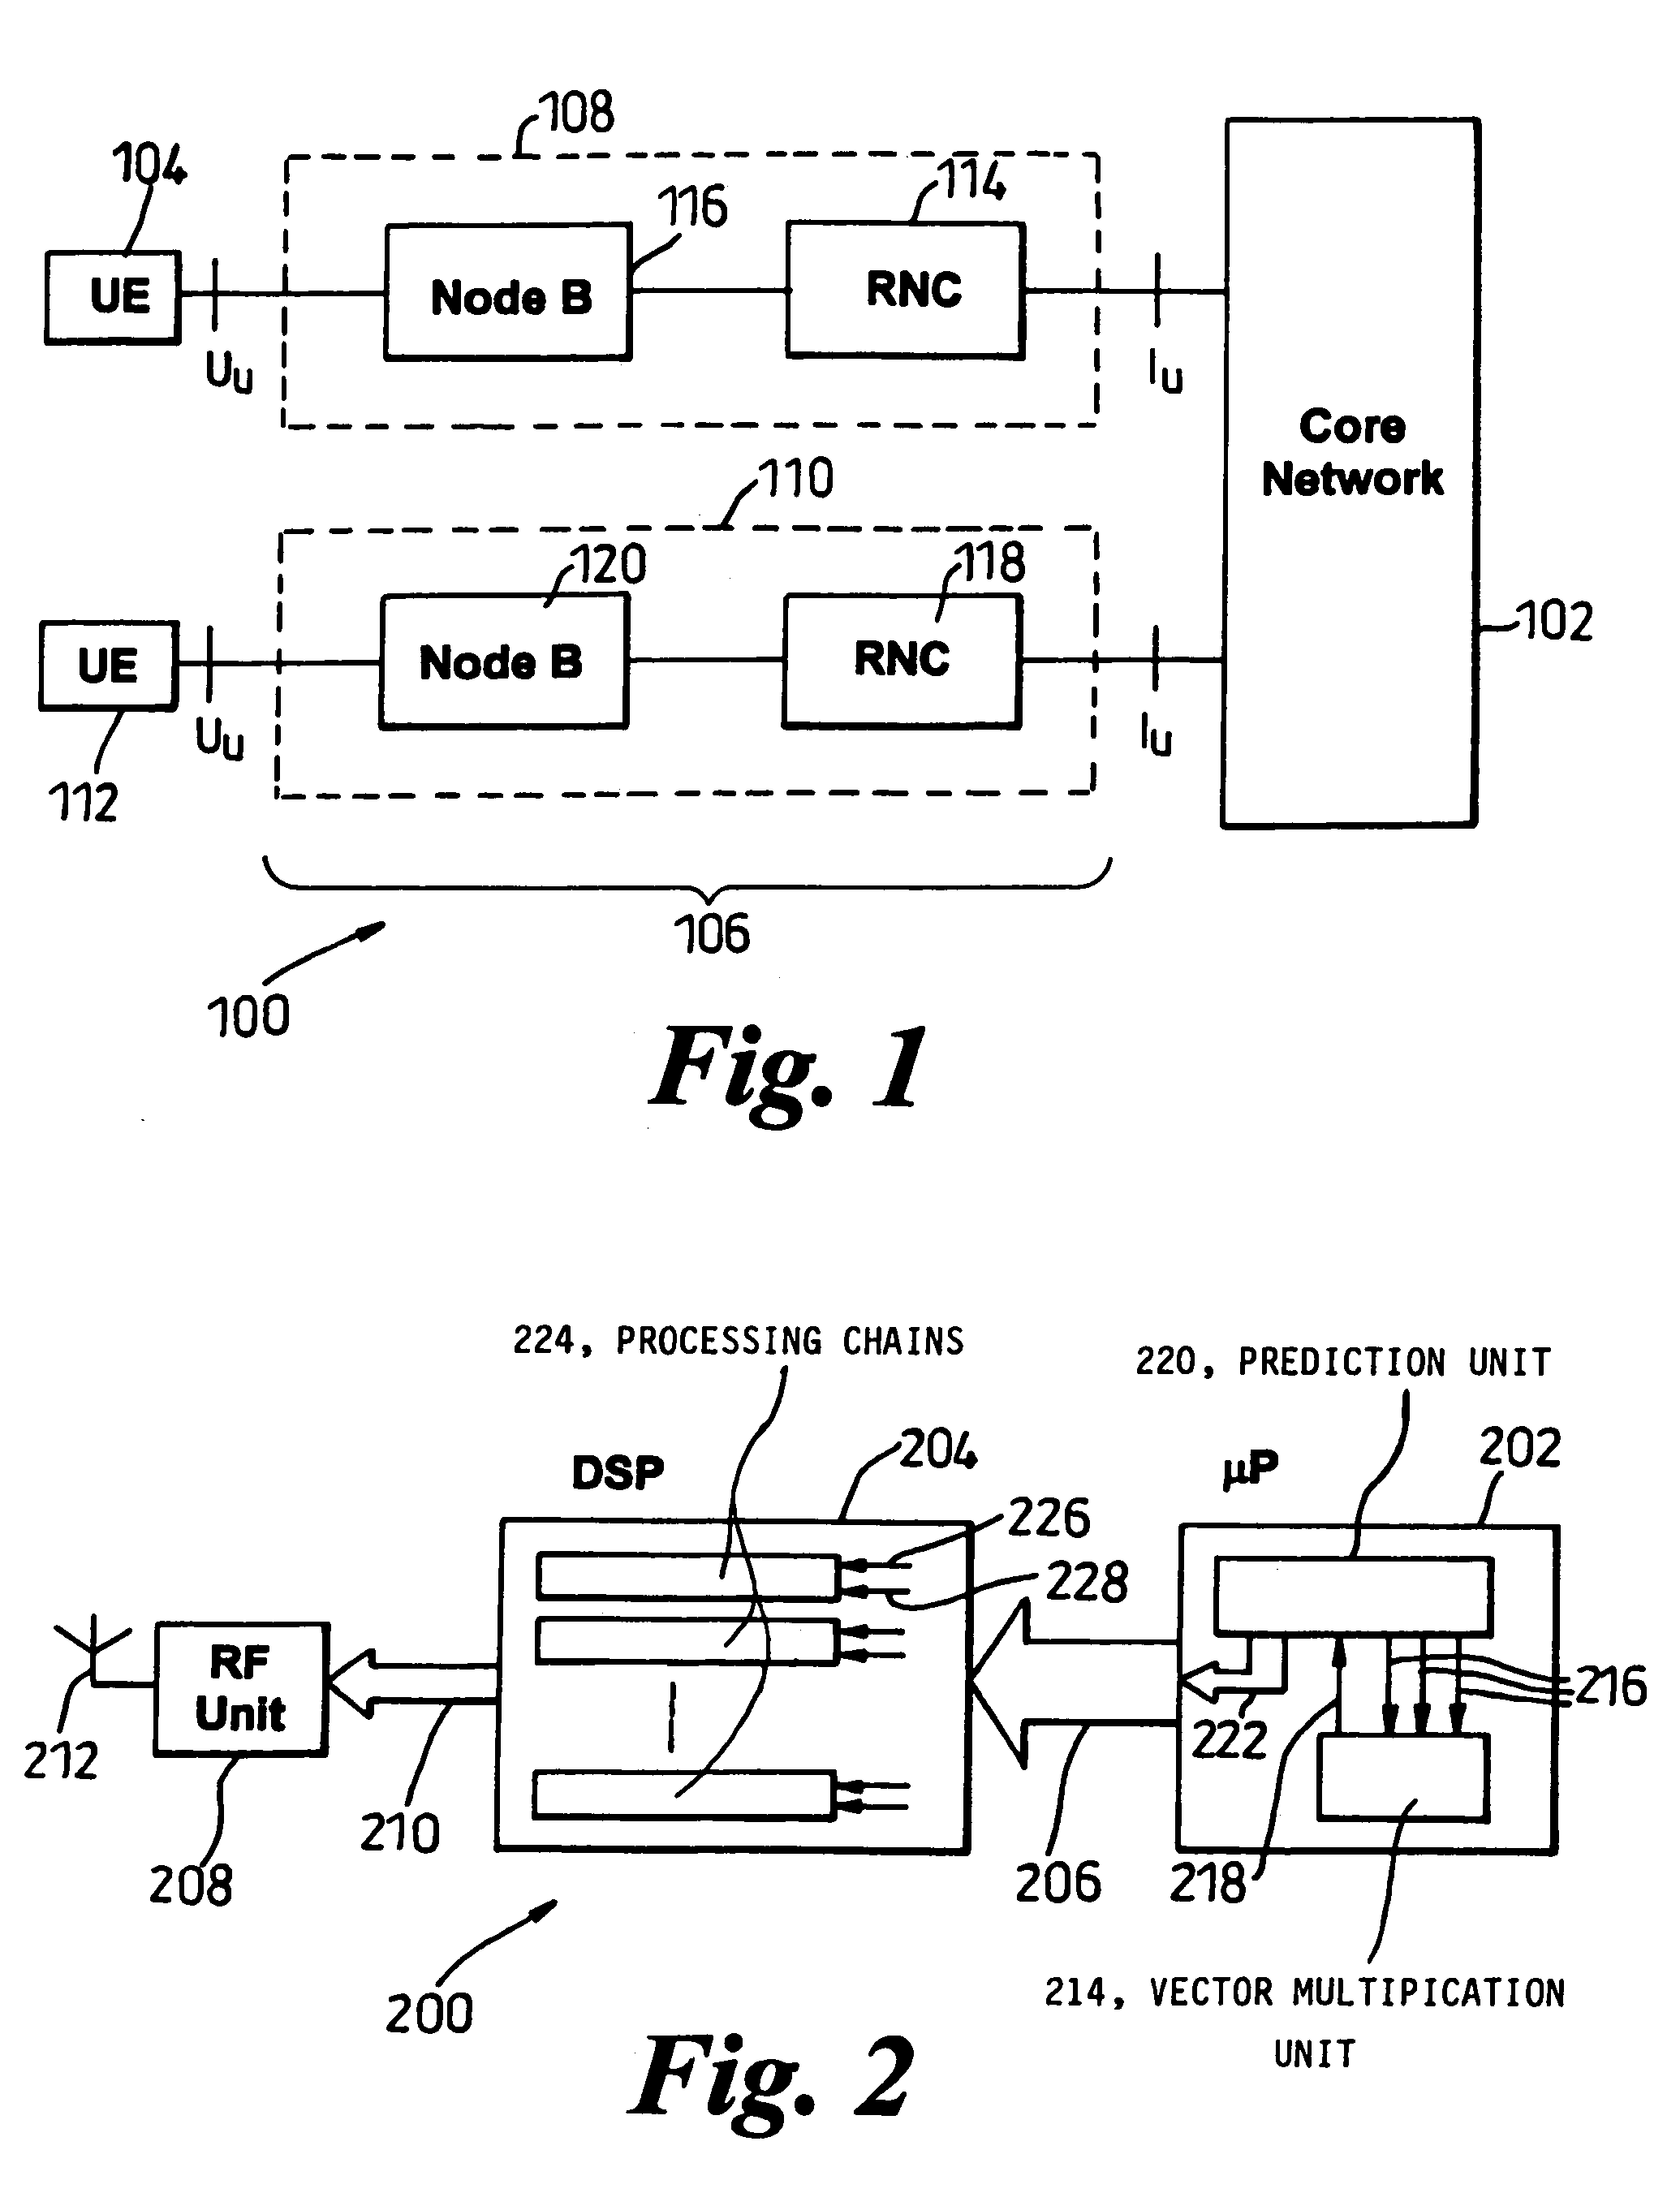 Method and apparatus for predicting a signalling code corresponding to a code spur